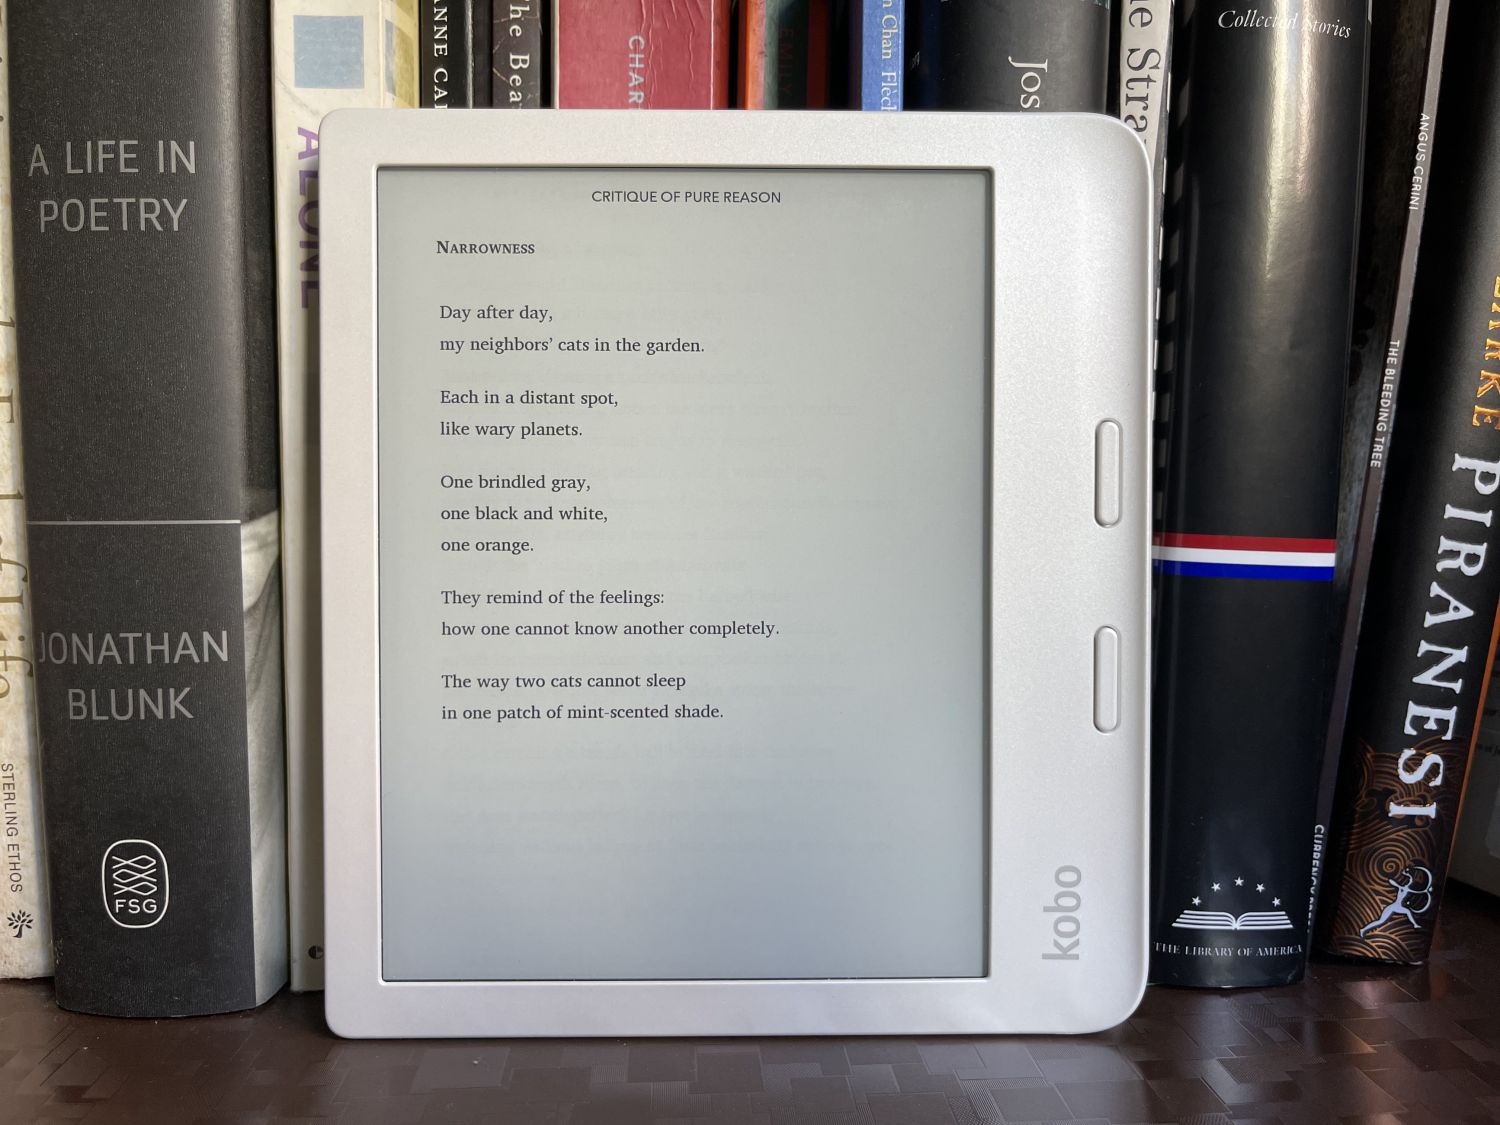 Kobo refreshes e-reader line with Sage and Libra 2, adding Bluetooth and  stylus support